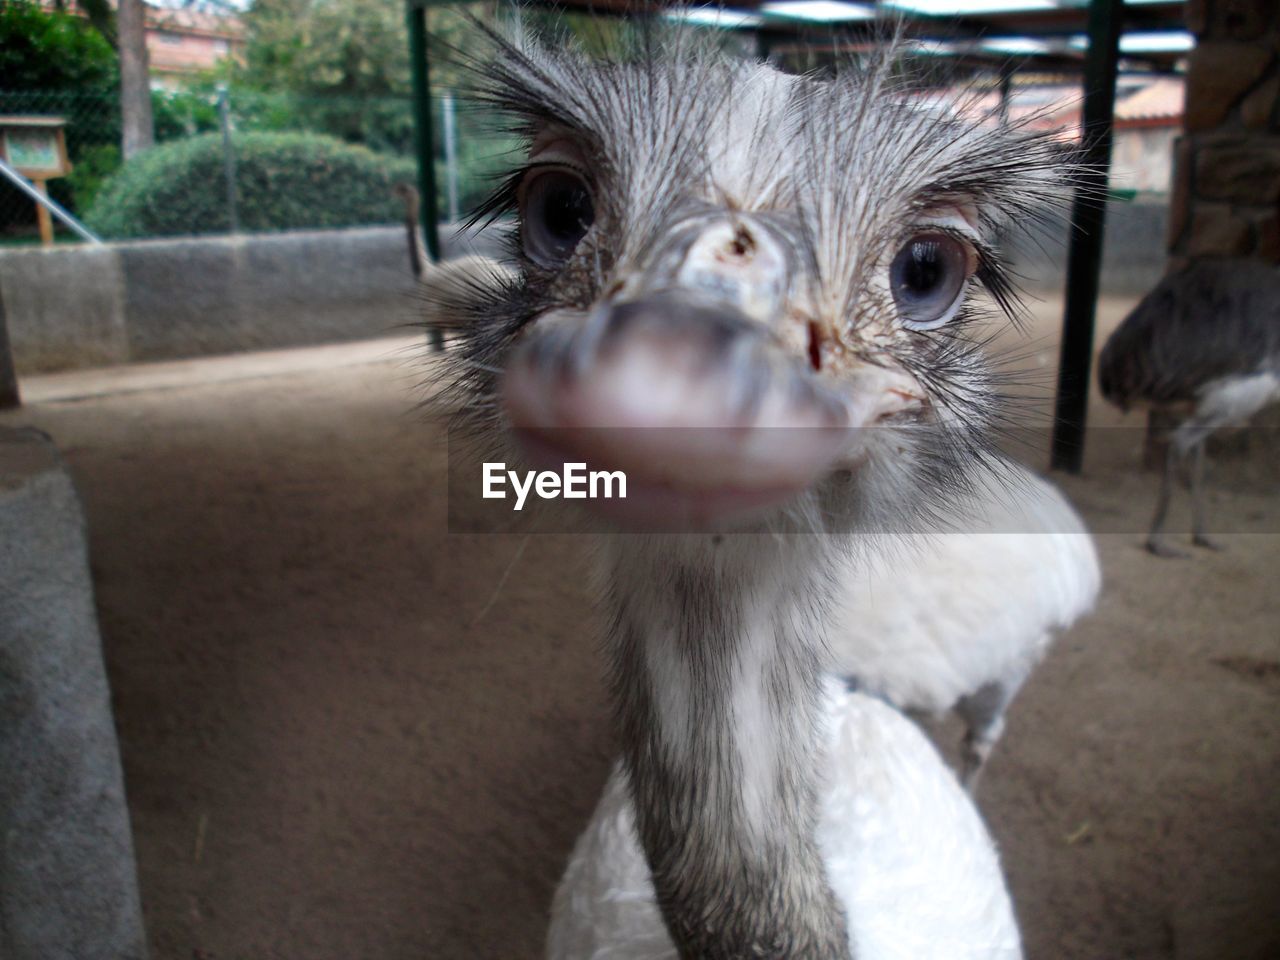 Close-up portrait of emu at zoo